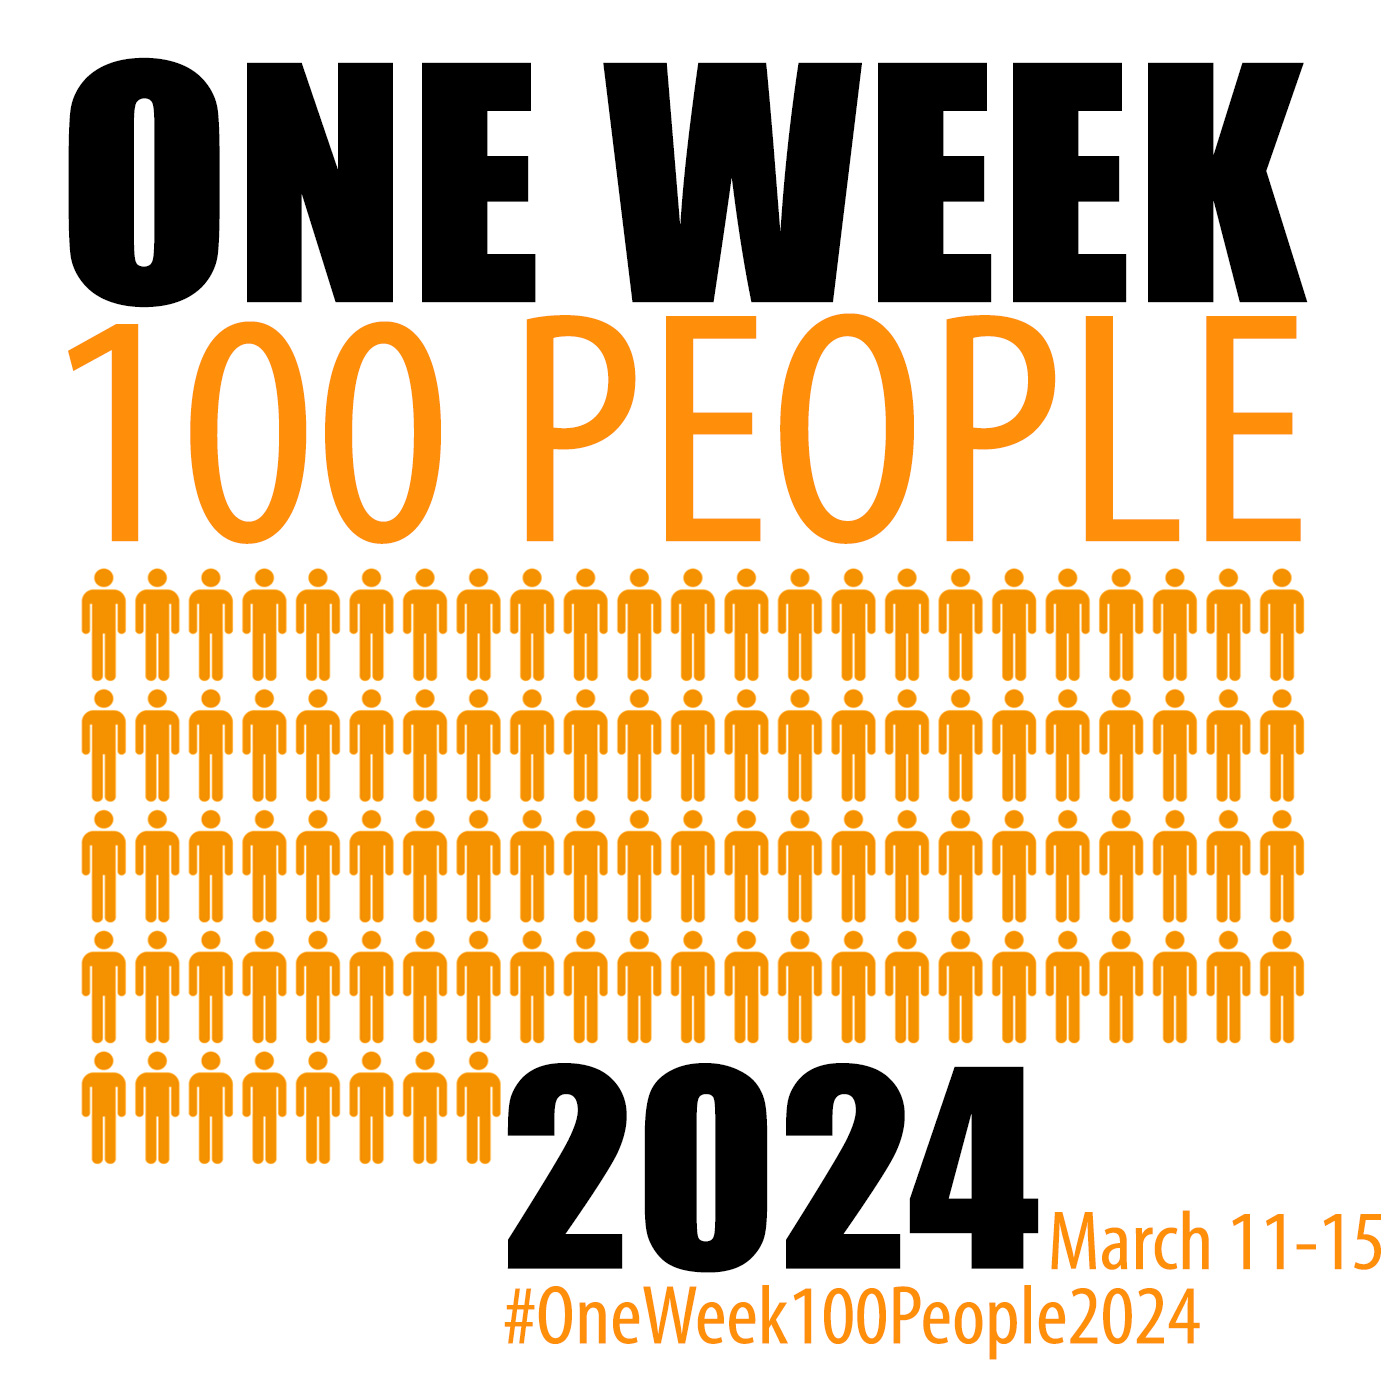 This year's OneWeek100People challenge: 11-15 March 2024 - Liz